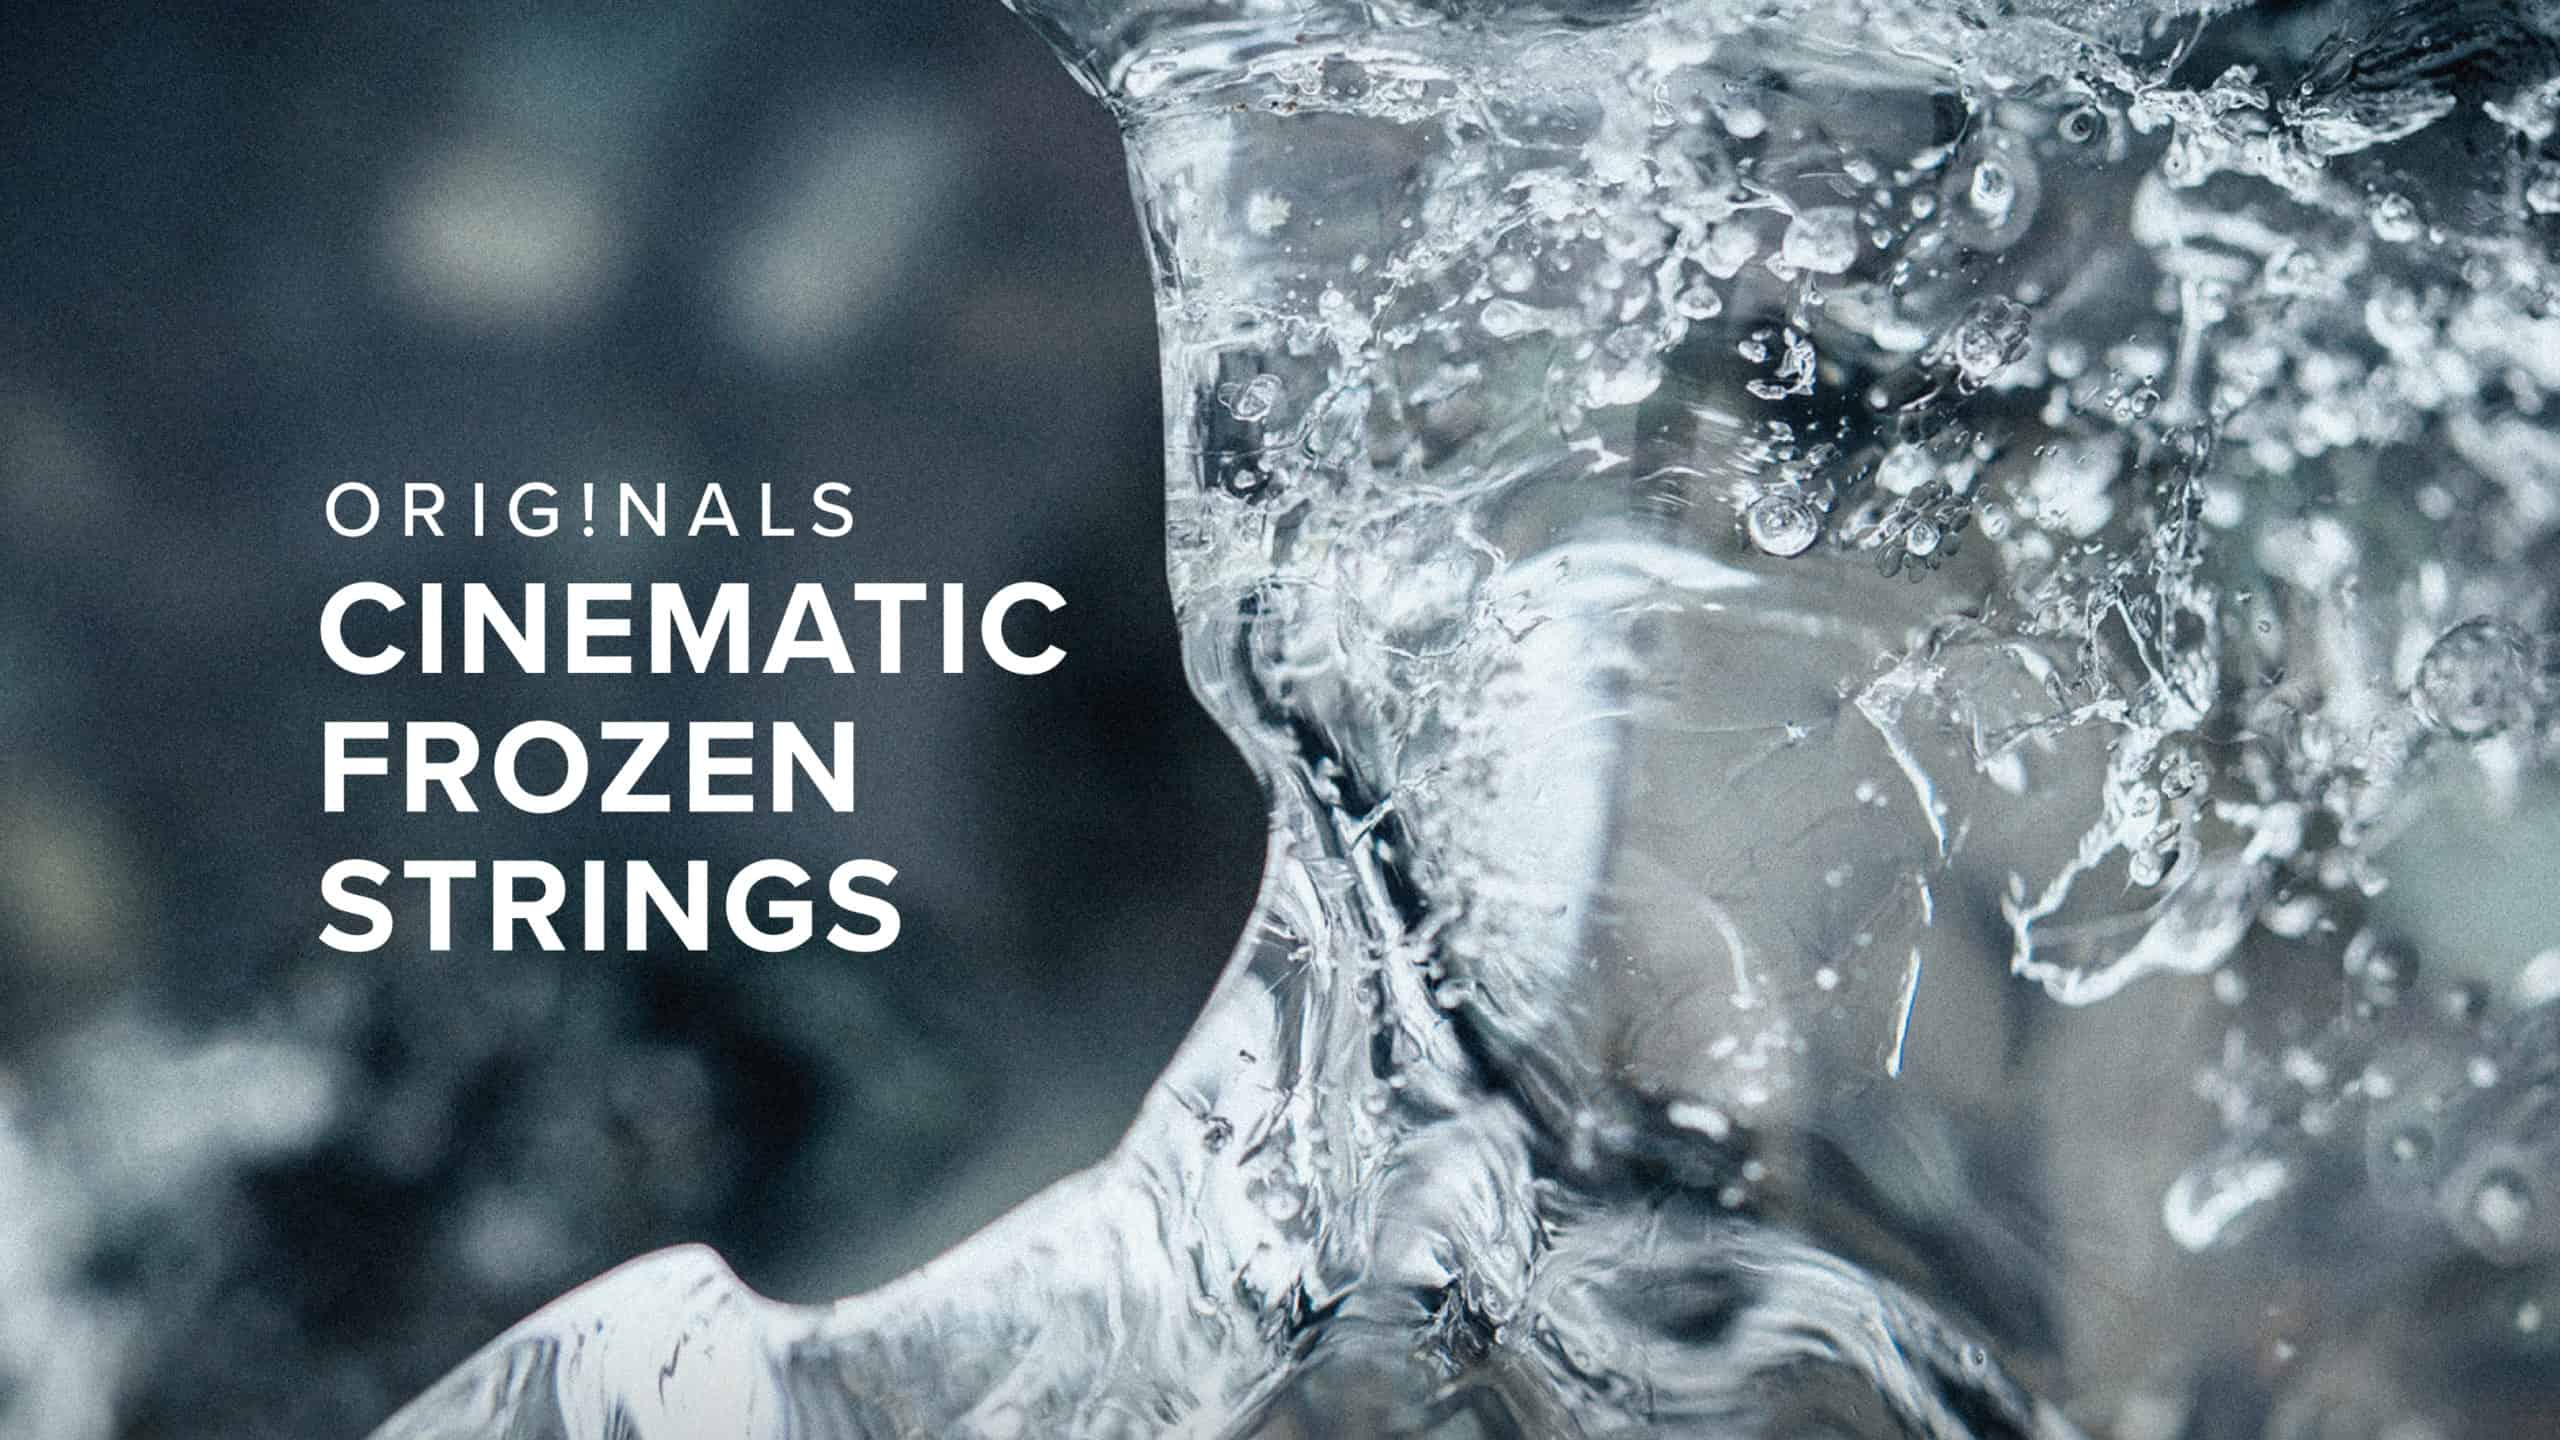 Cinematic Frozen Strings – Sound from The Ice